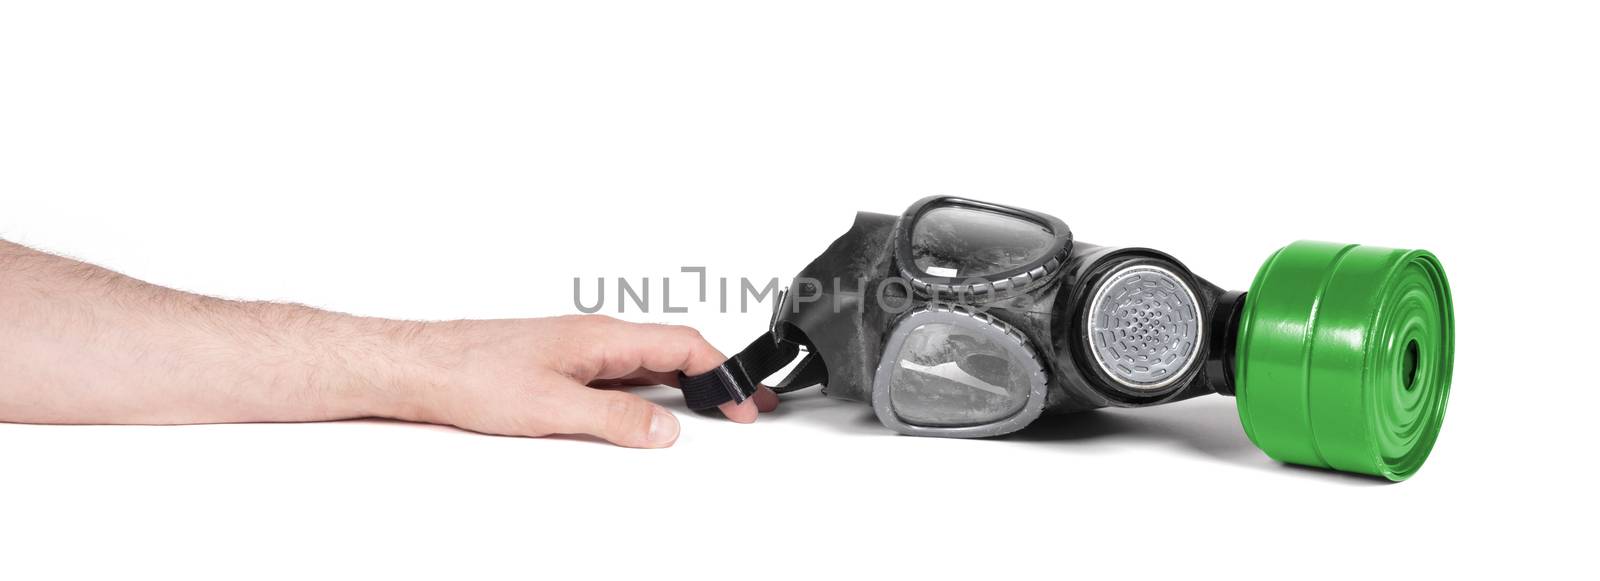 Arm reaching for vintage gasmask isolated on a white background - Green filter